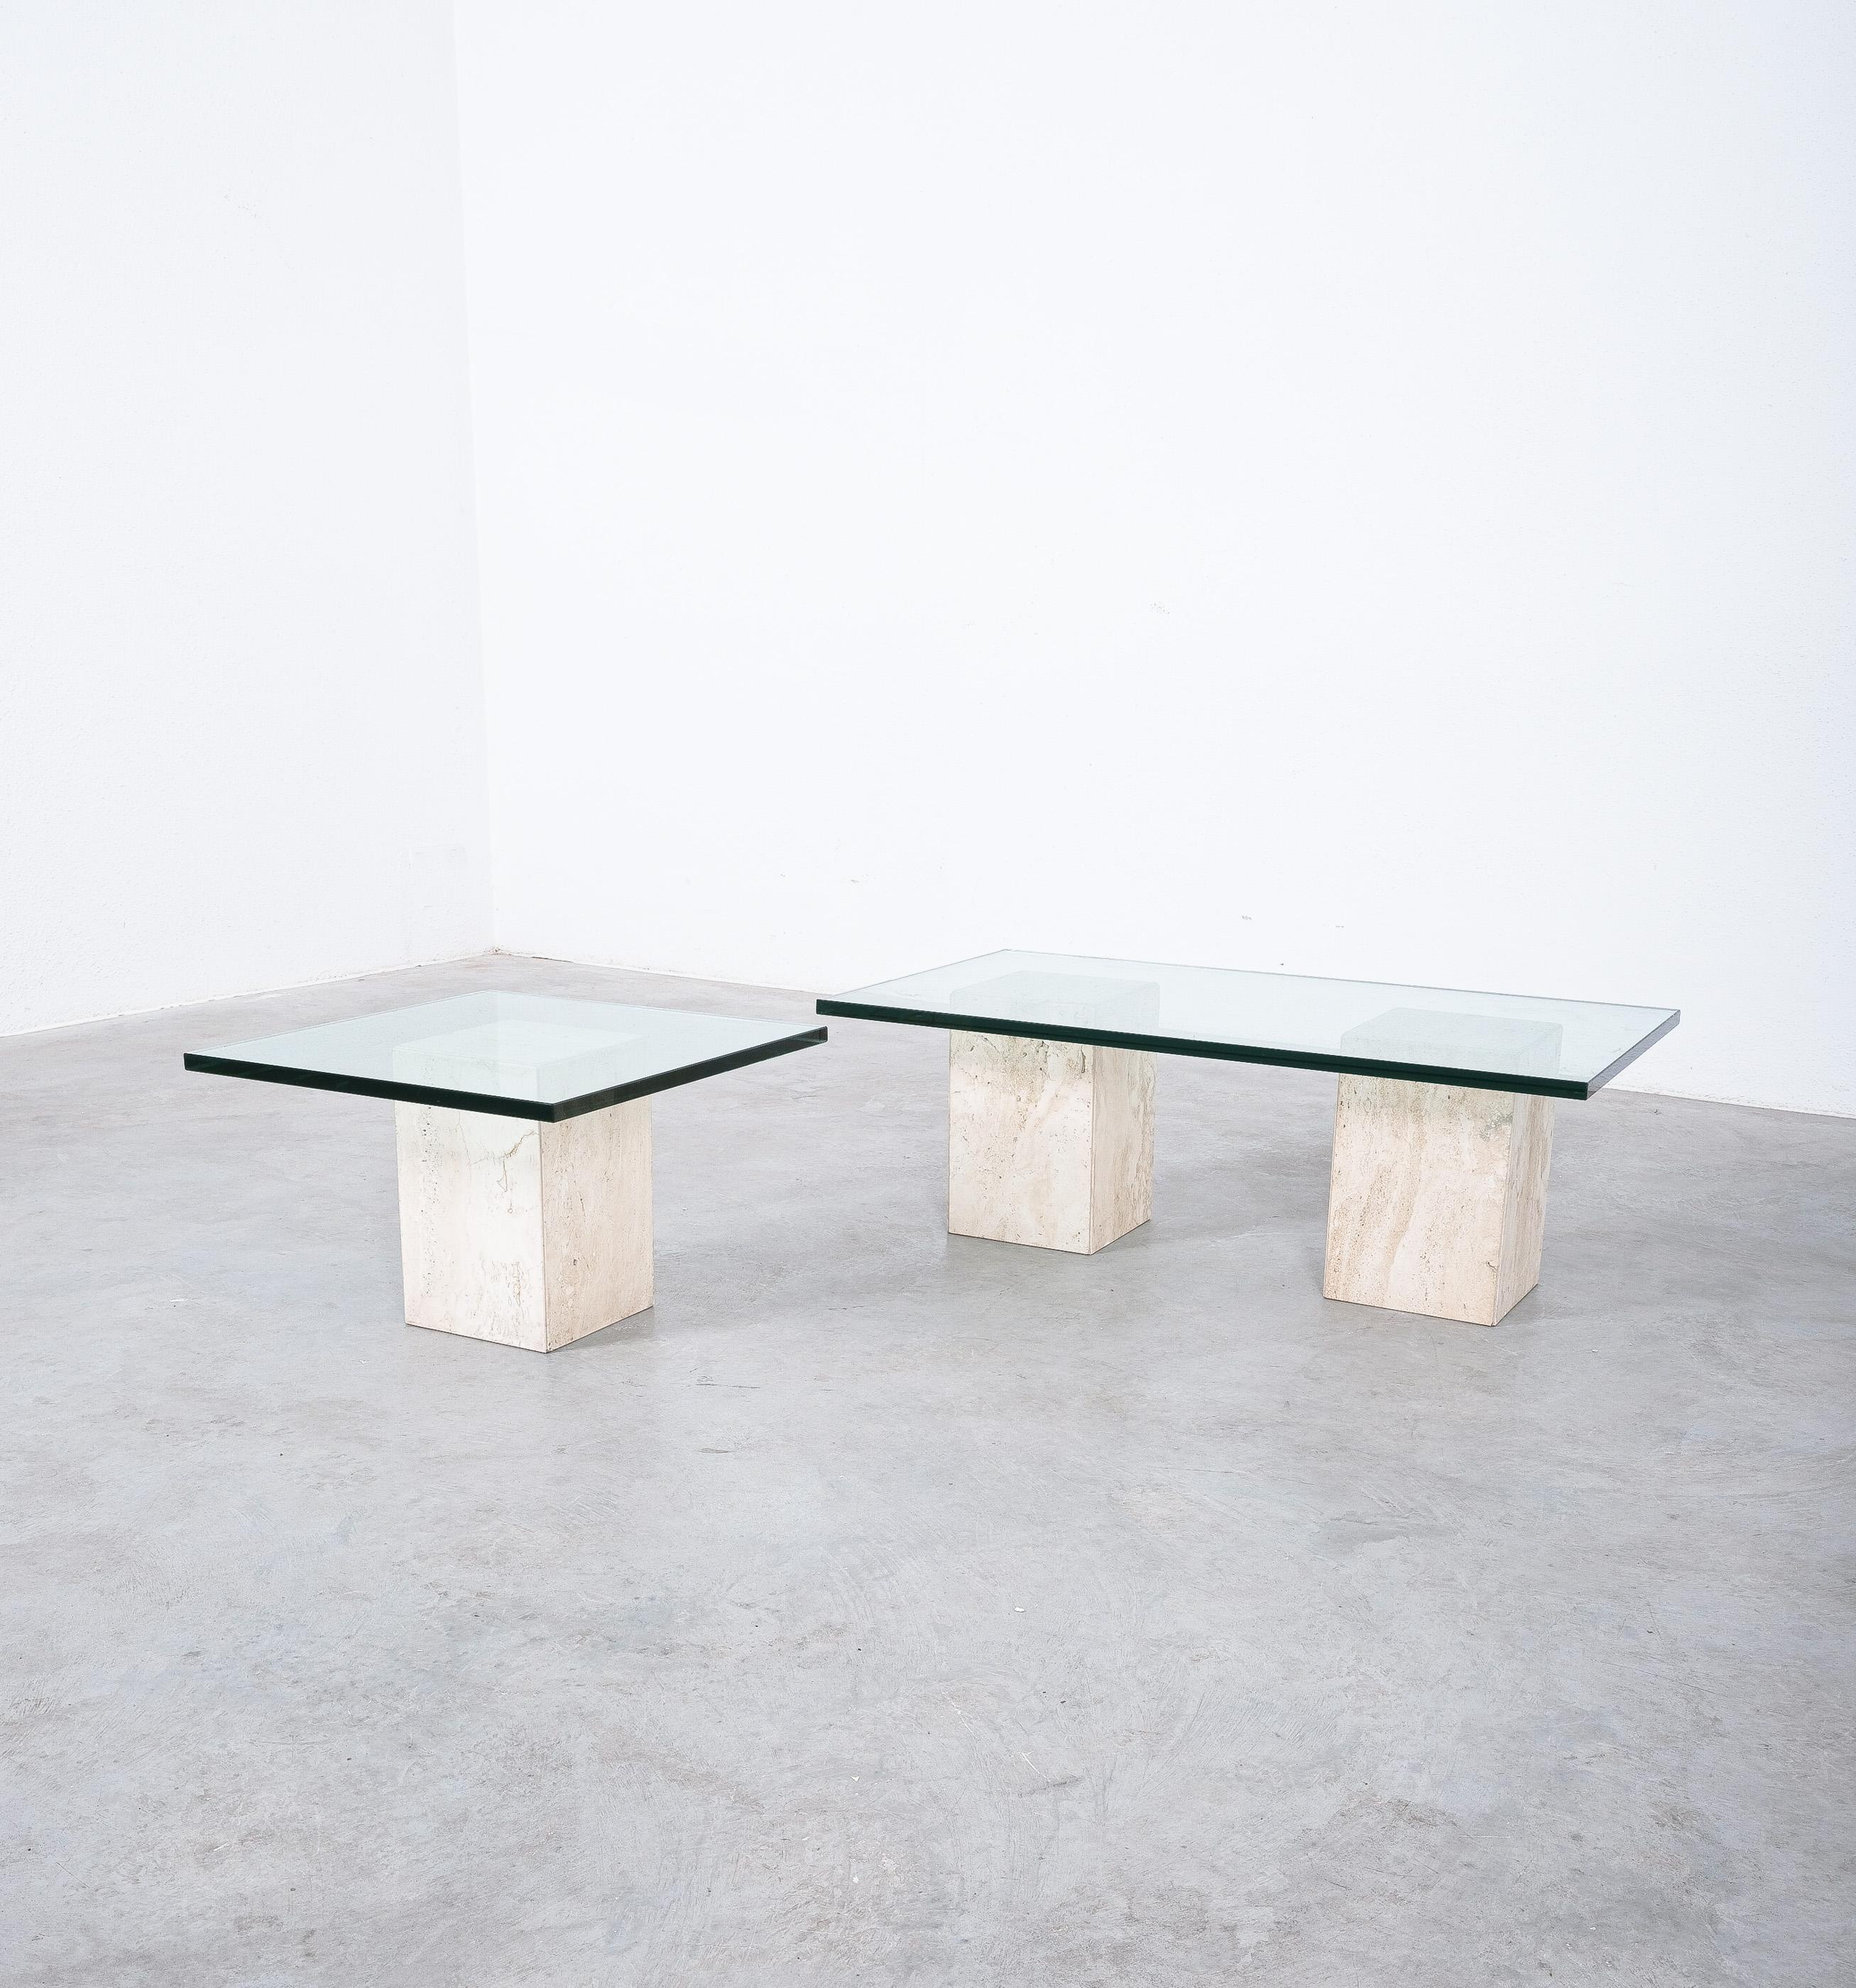 Travertine Tables from Three Blocks with Glass Tops, Italy, circa 1970 For Sale 9